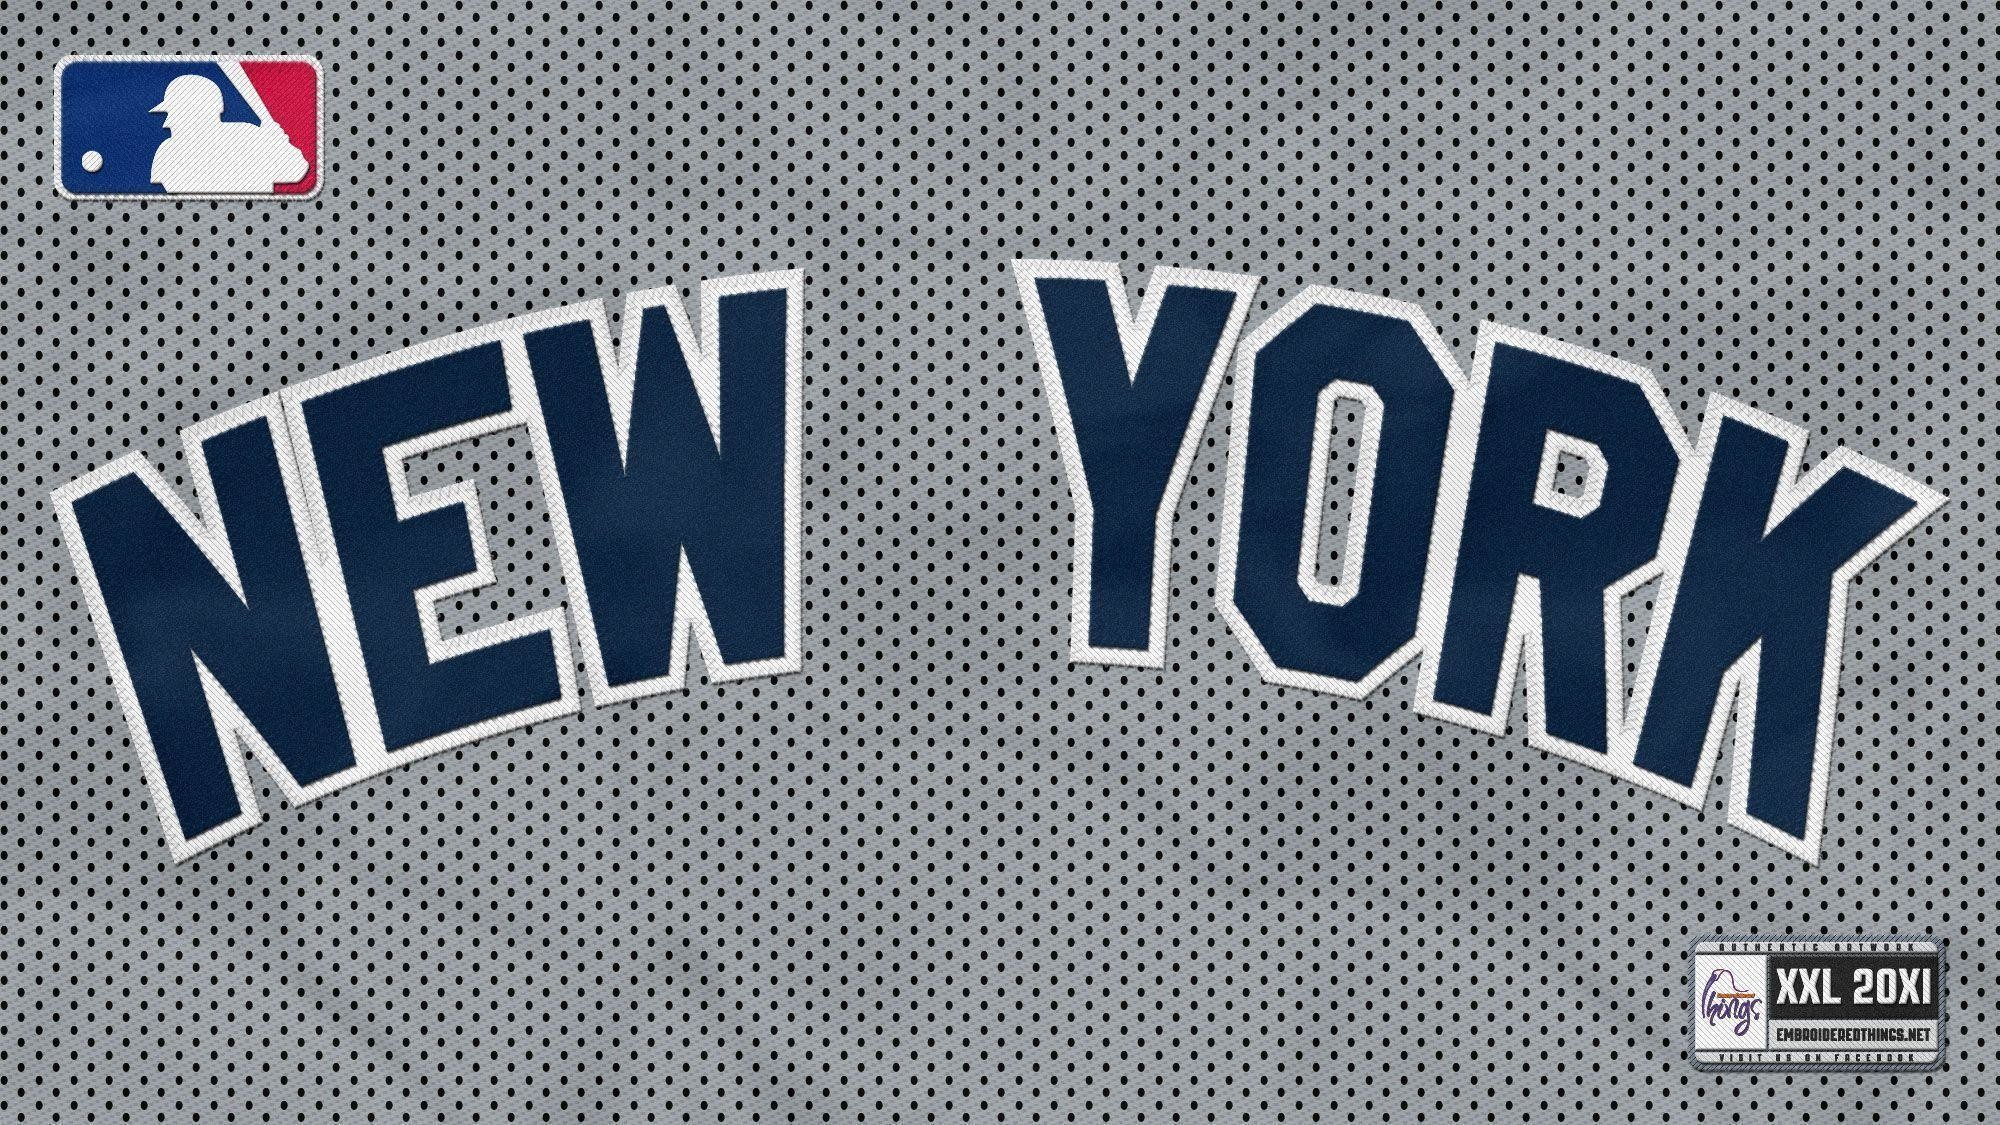 23 New York Yankees Wallpapers | New York Yankees Backgrounds